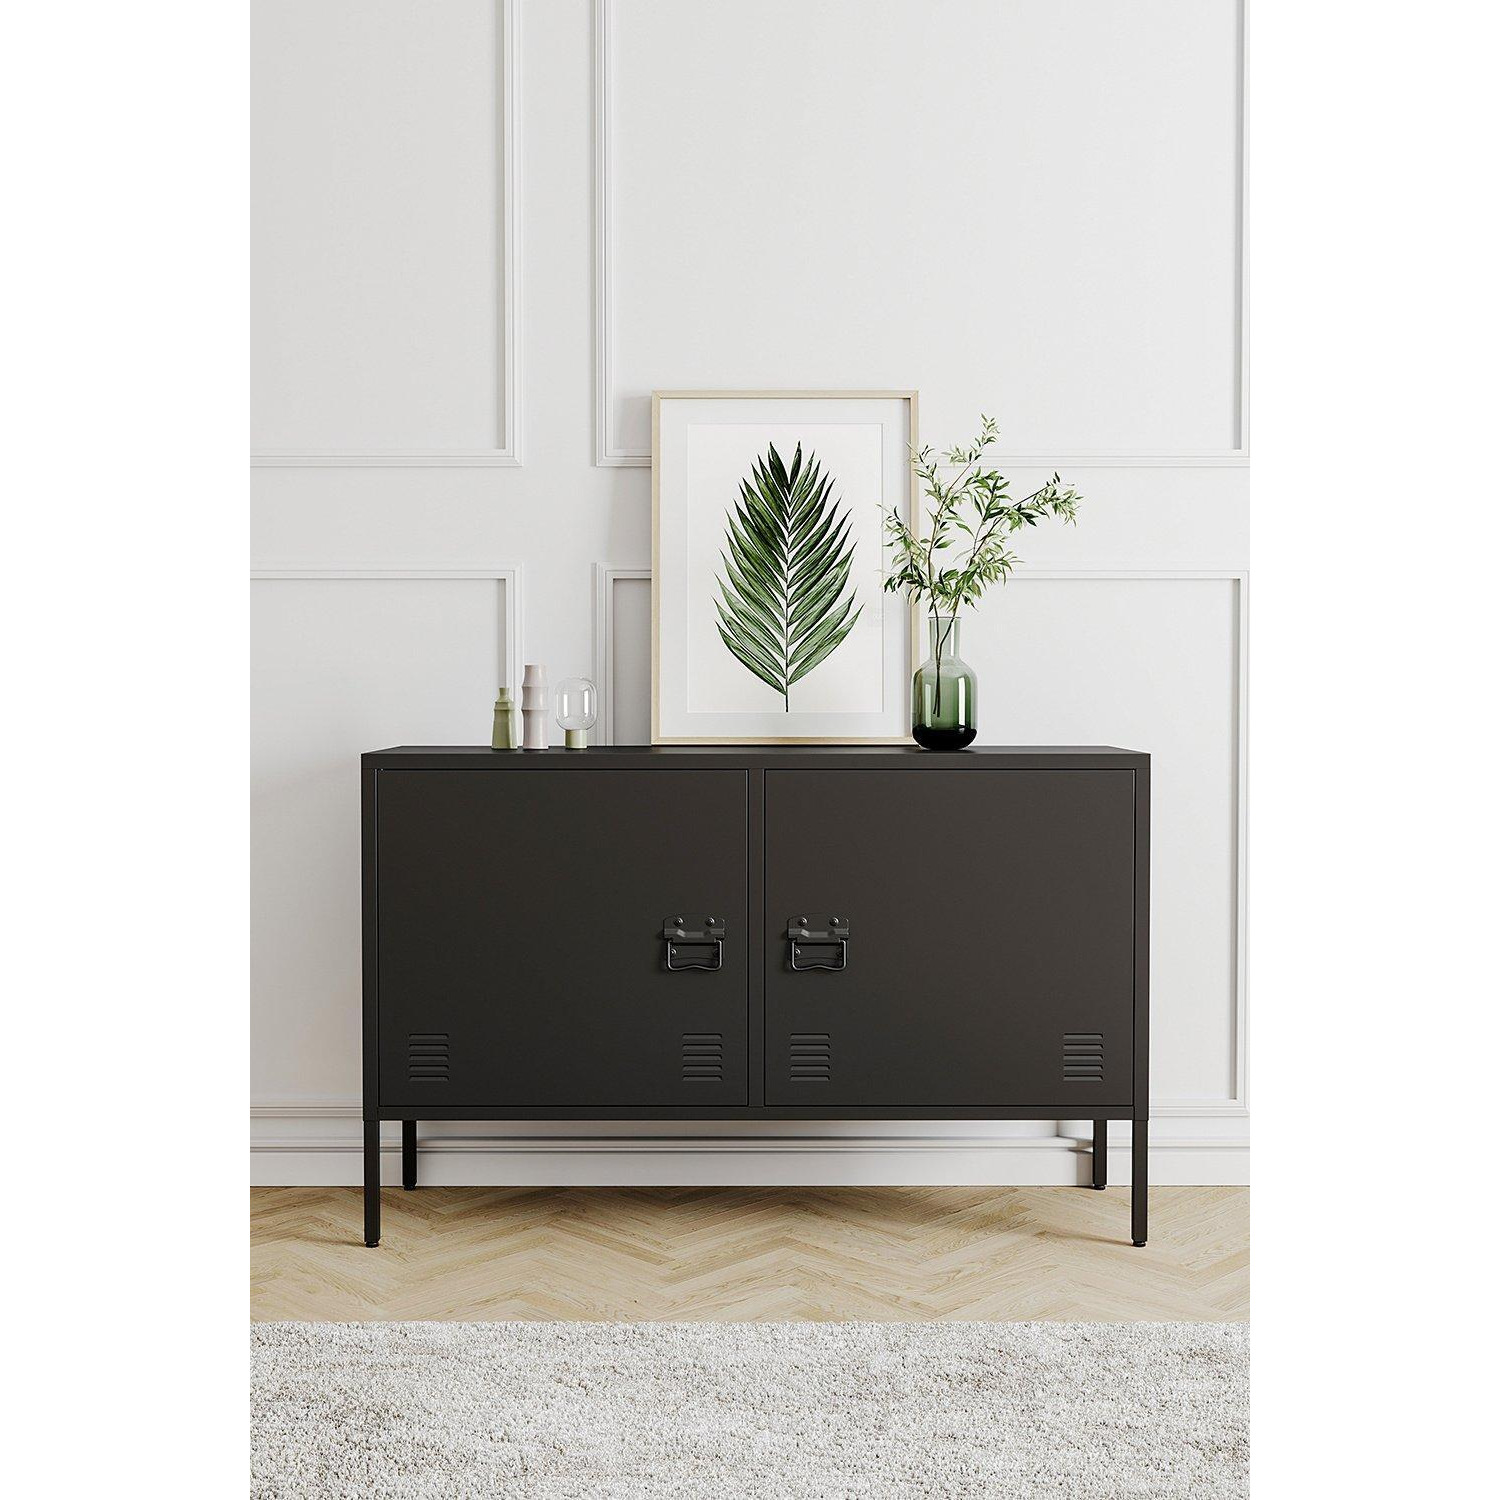 Black Metal Lateral File Cabinet with 2 Doors Industrial Style TV Stand Storage Cabinet - image 1